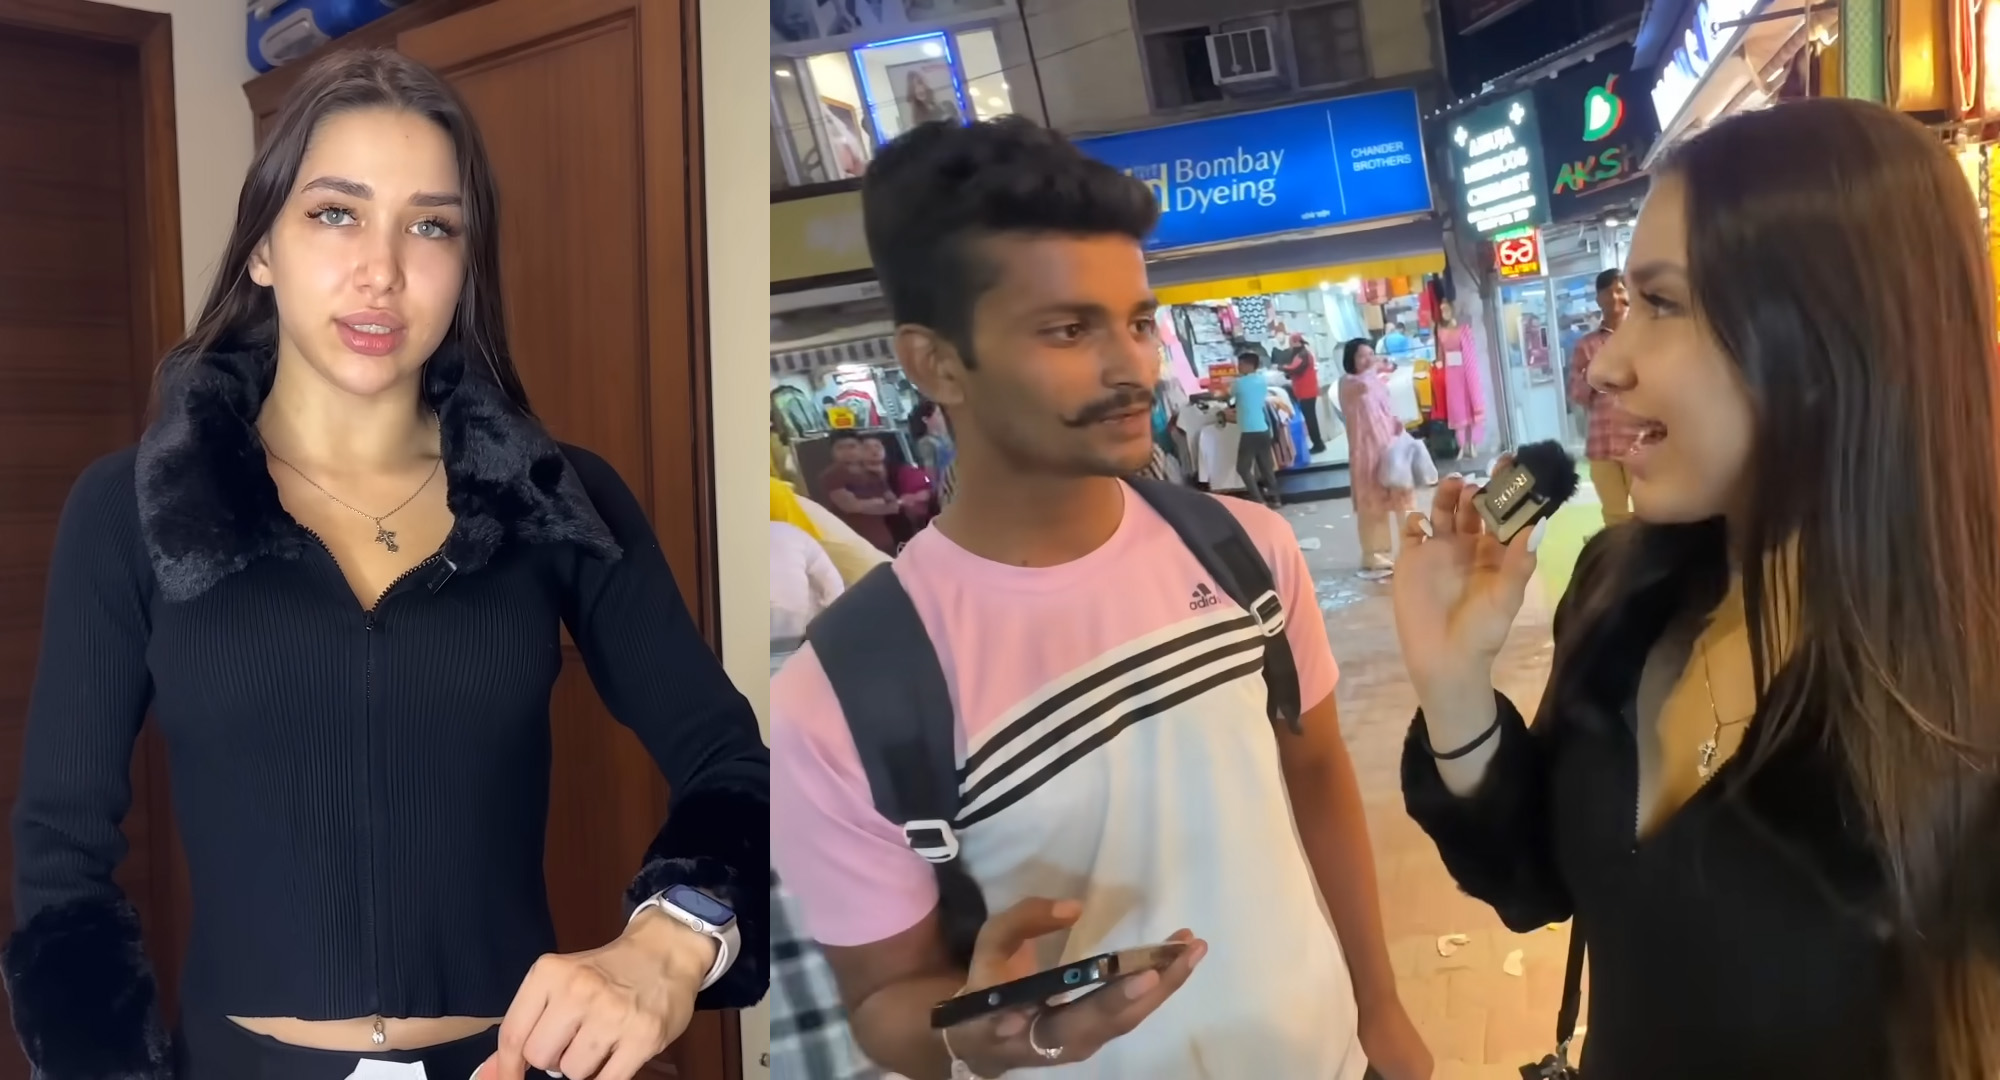 Desisixyvideo - Watch video: Russian YouTuber harassed while vlogging in Delhi